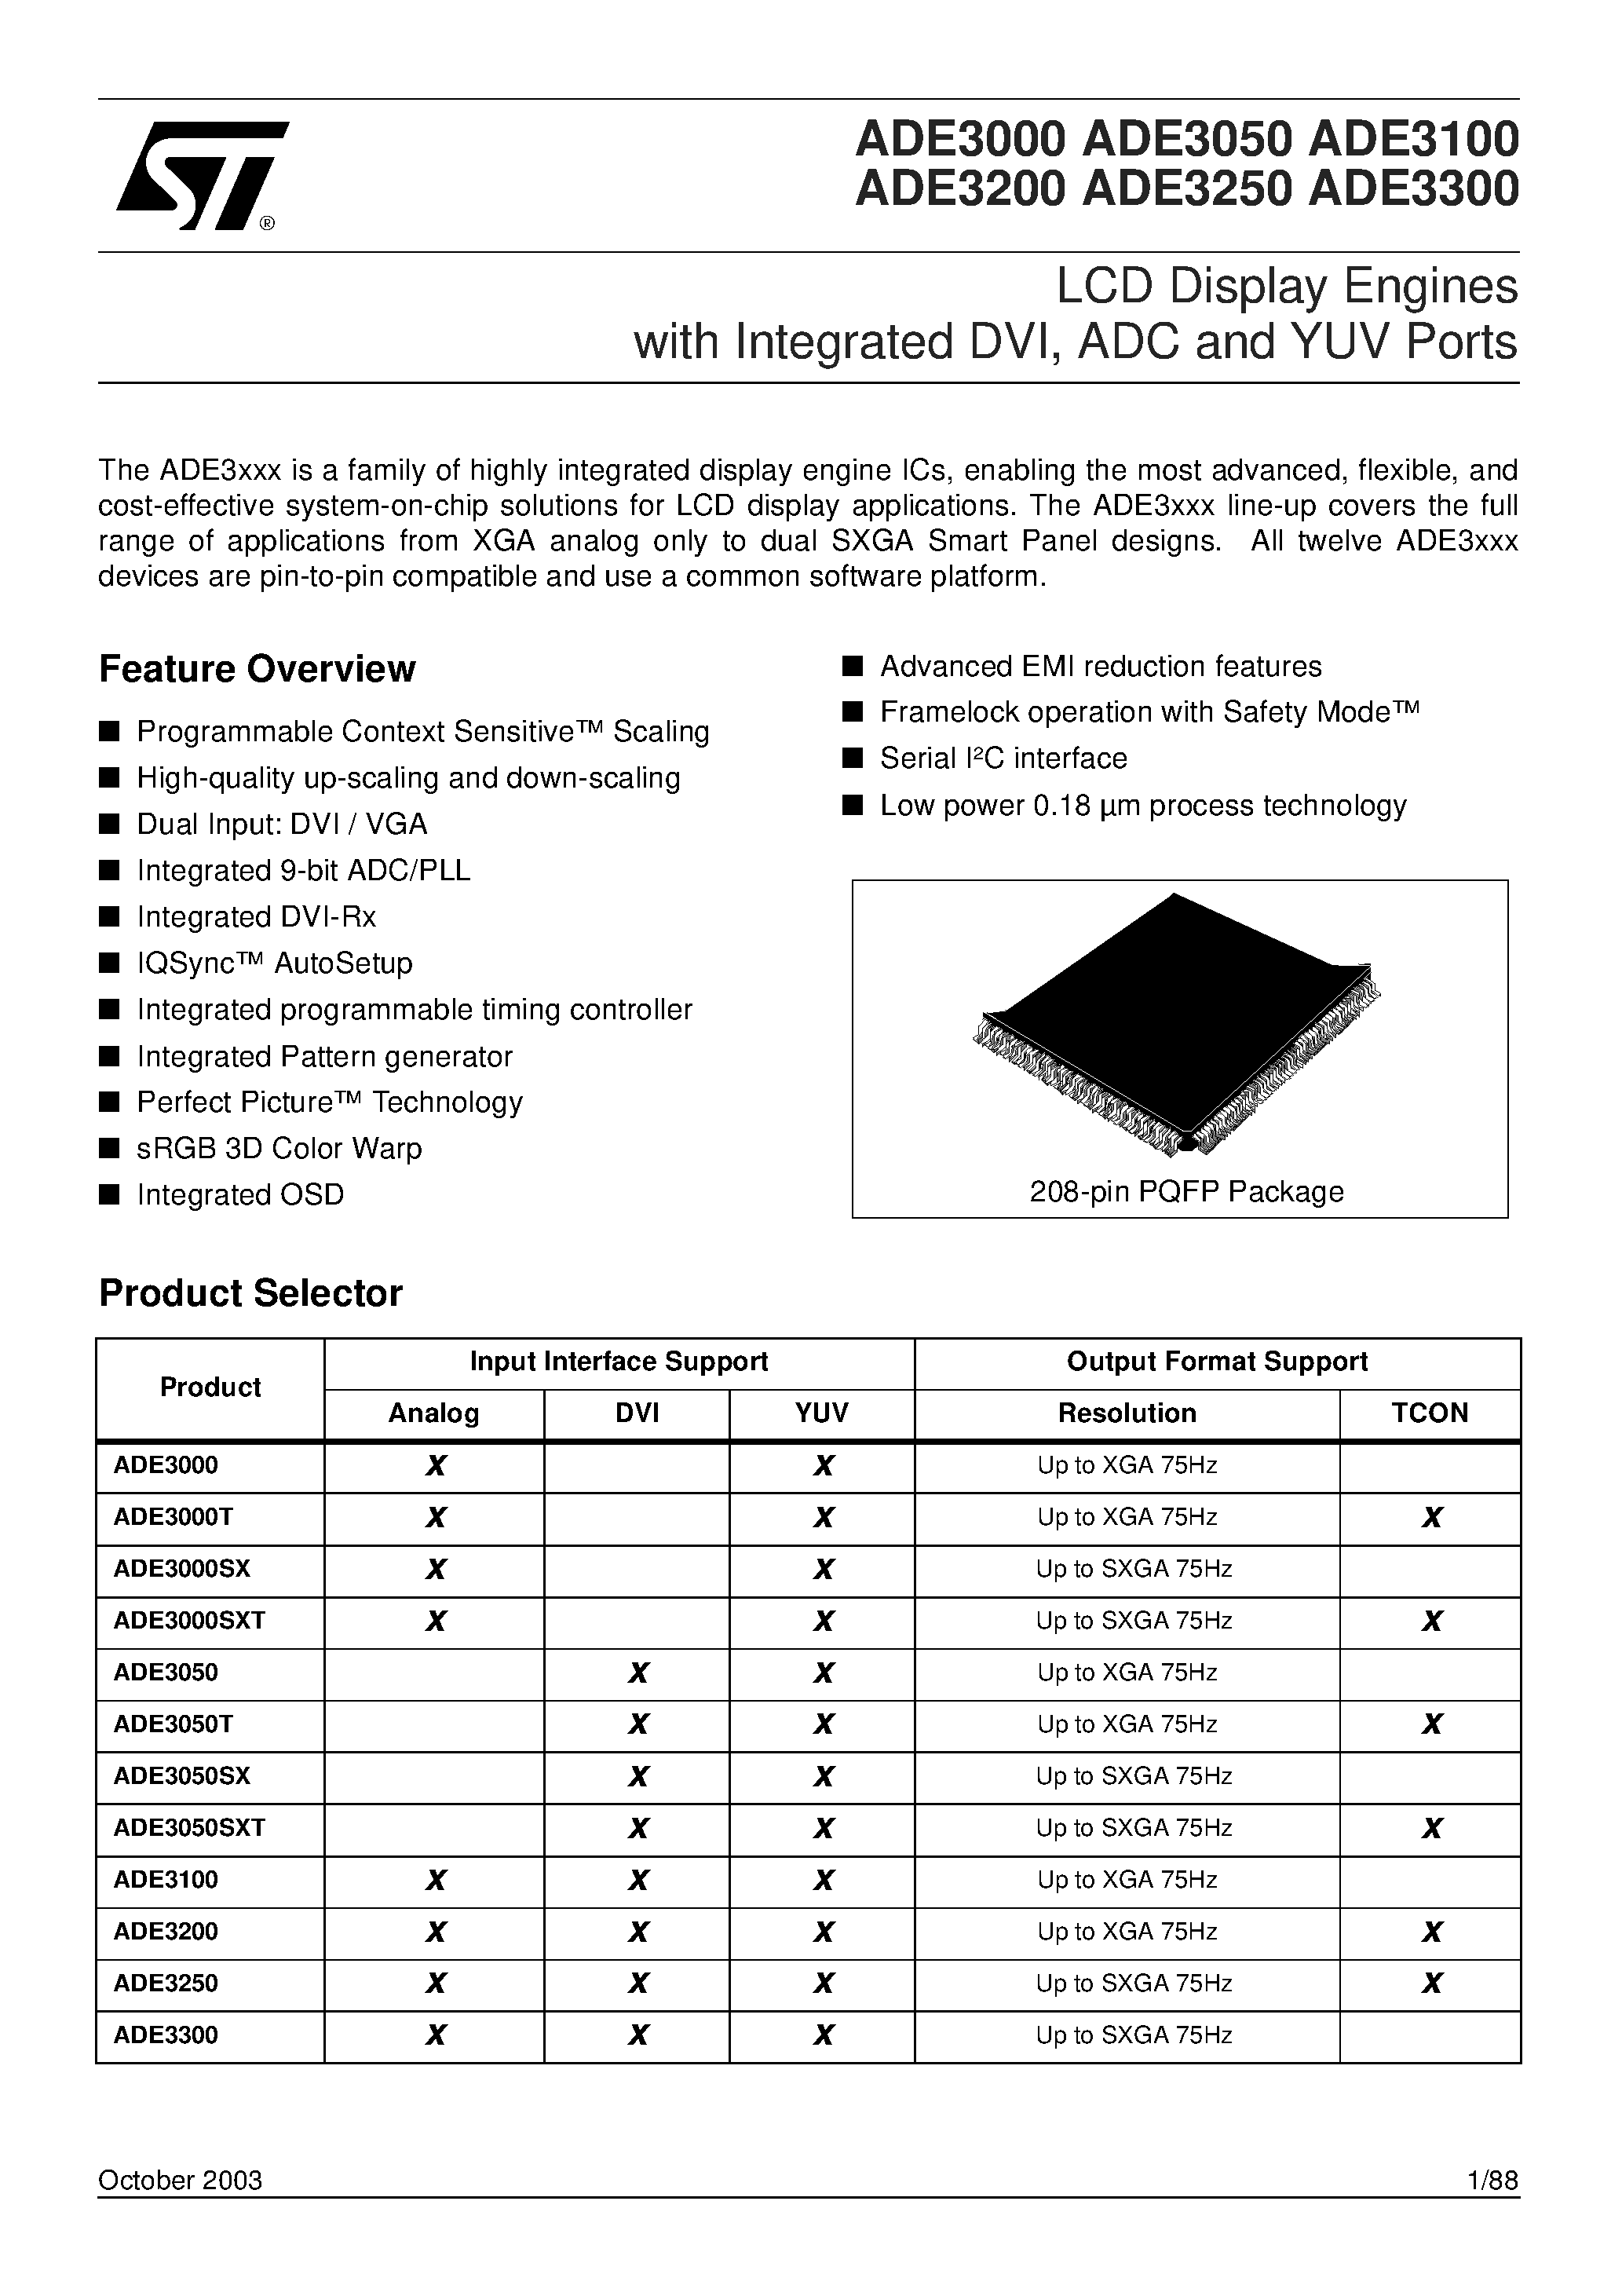 Datasheet ADE3000SX - LCD Display Engines with Integrated DVI/ ADC and YUV Ports page 1